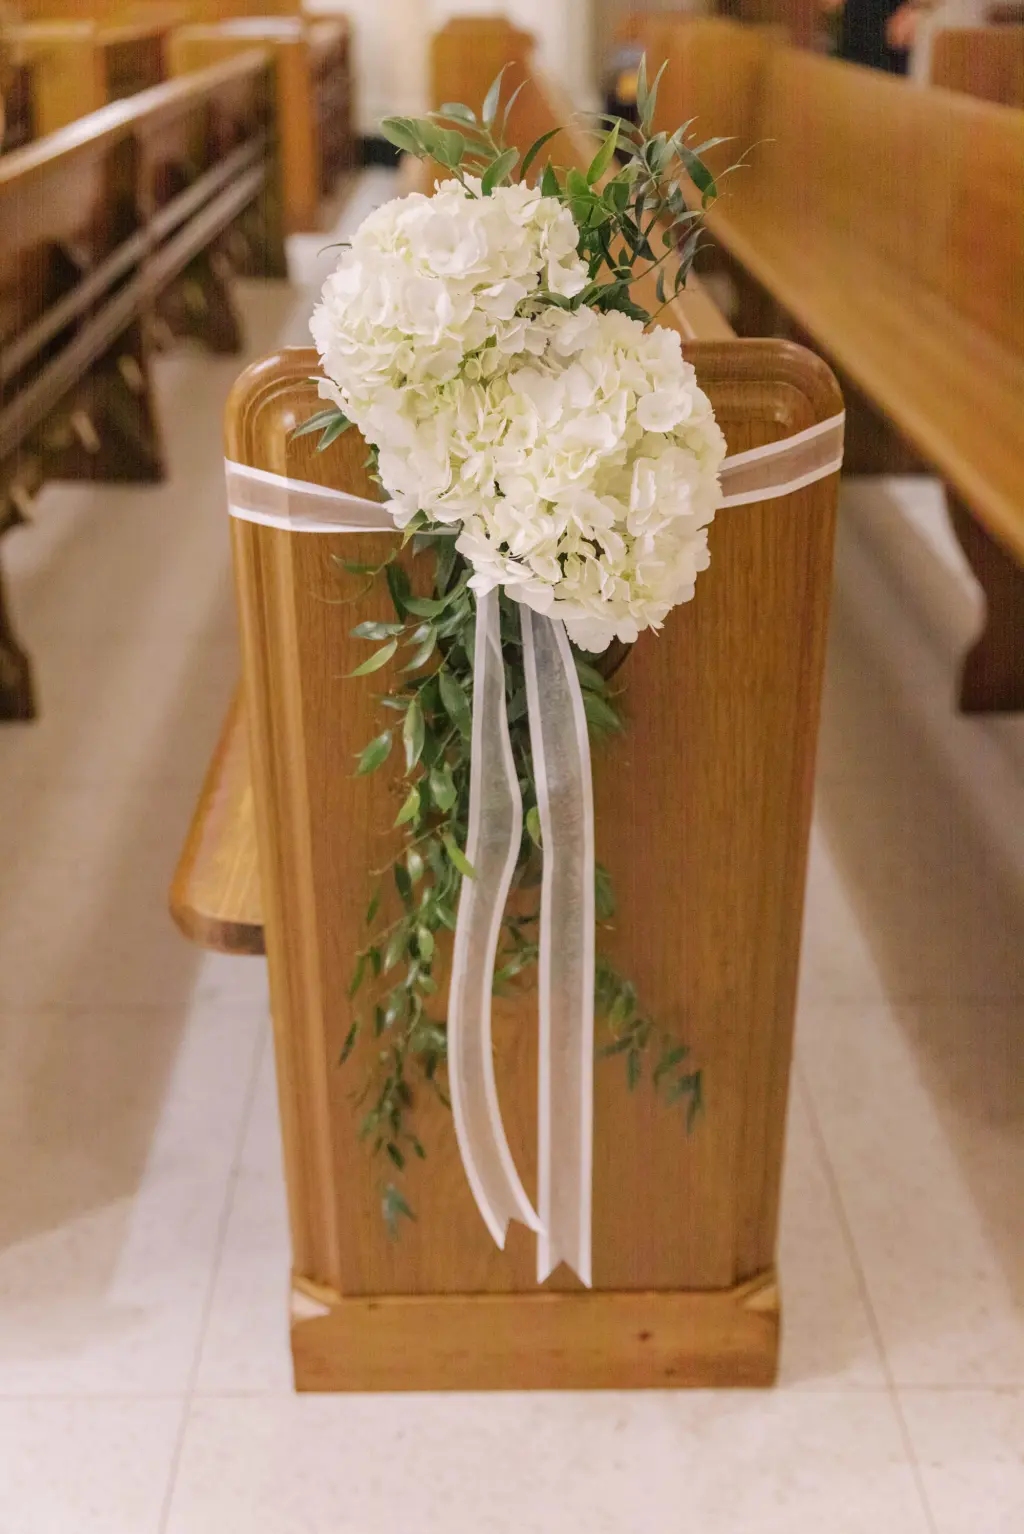 Classic White Hydrangea Details with Greenery and White Ribbon on Church Pews Wedding Ceremony Decor Ideas